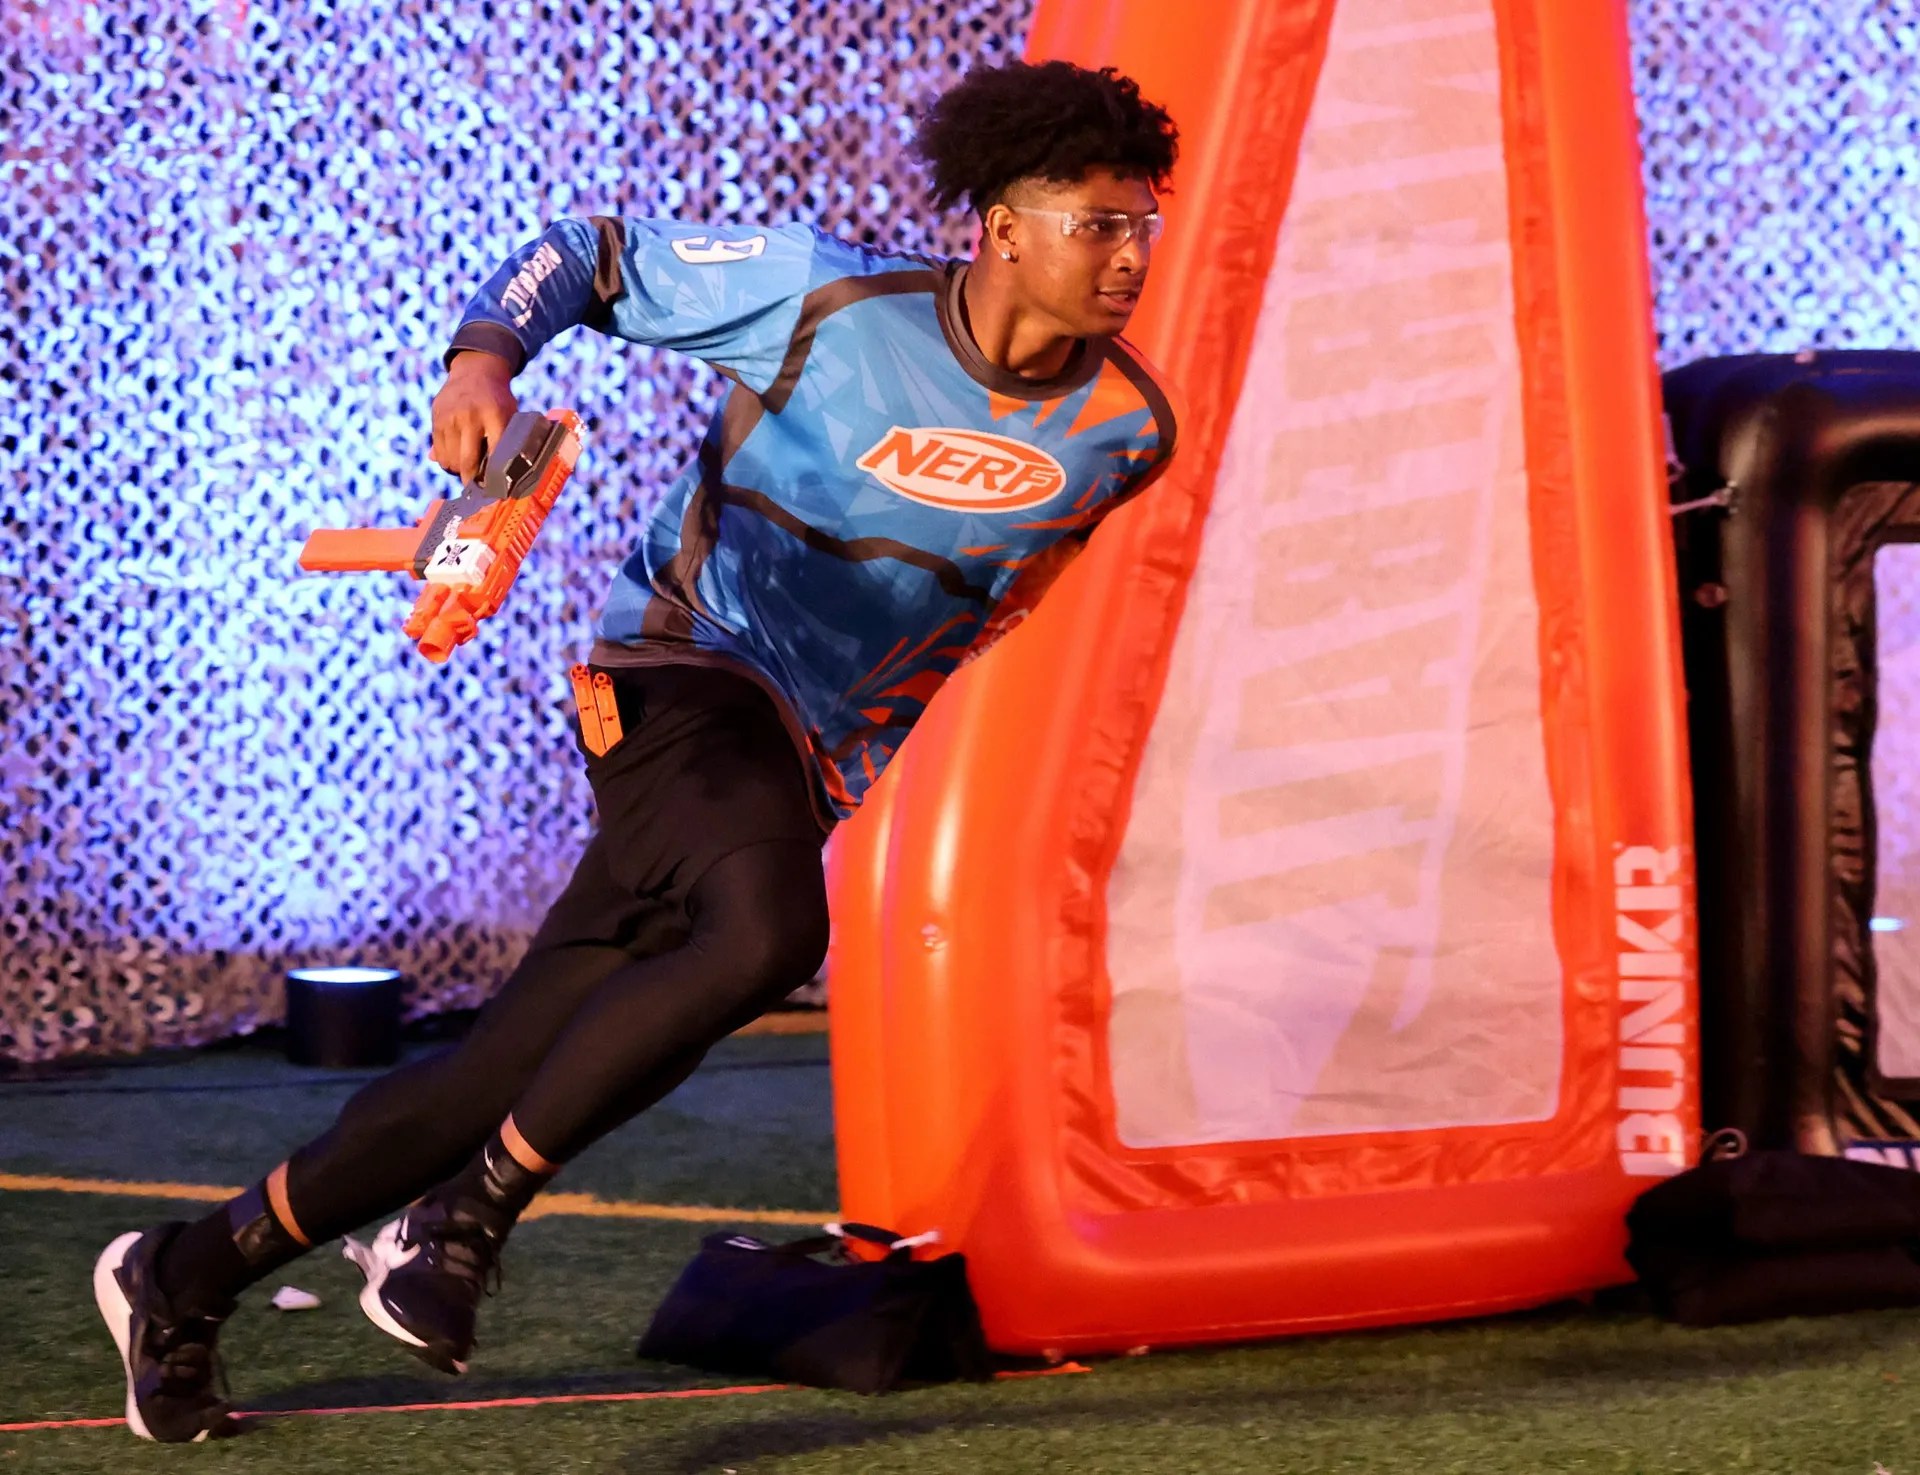 Hasbro Introduces Nerfball: The Official Nerf Sport